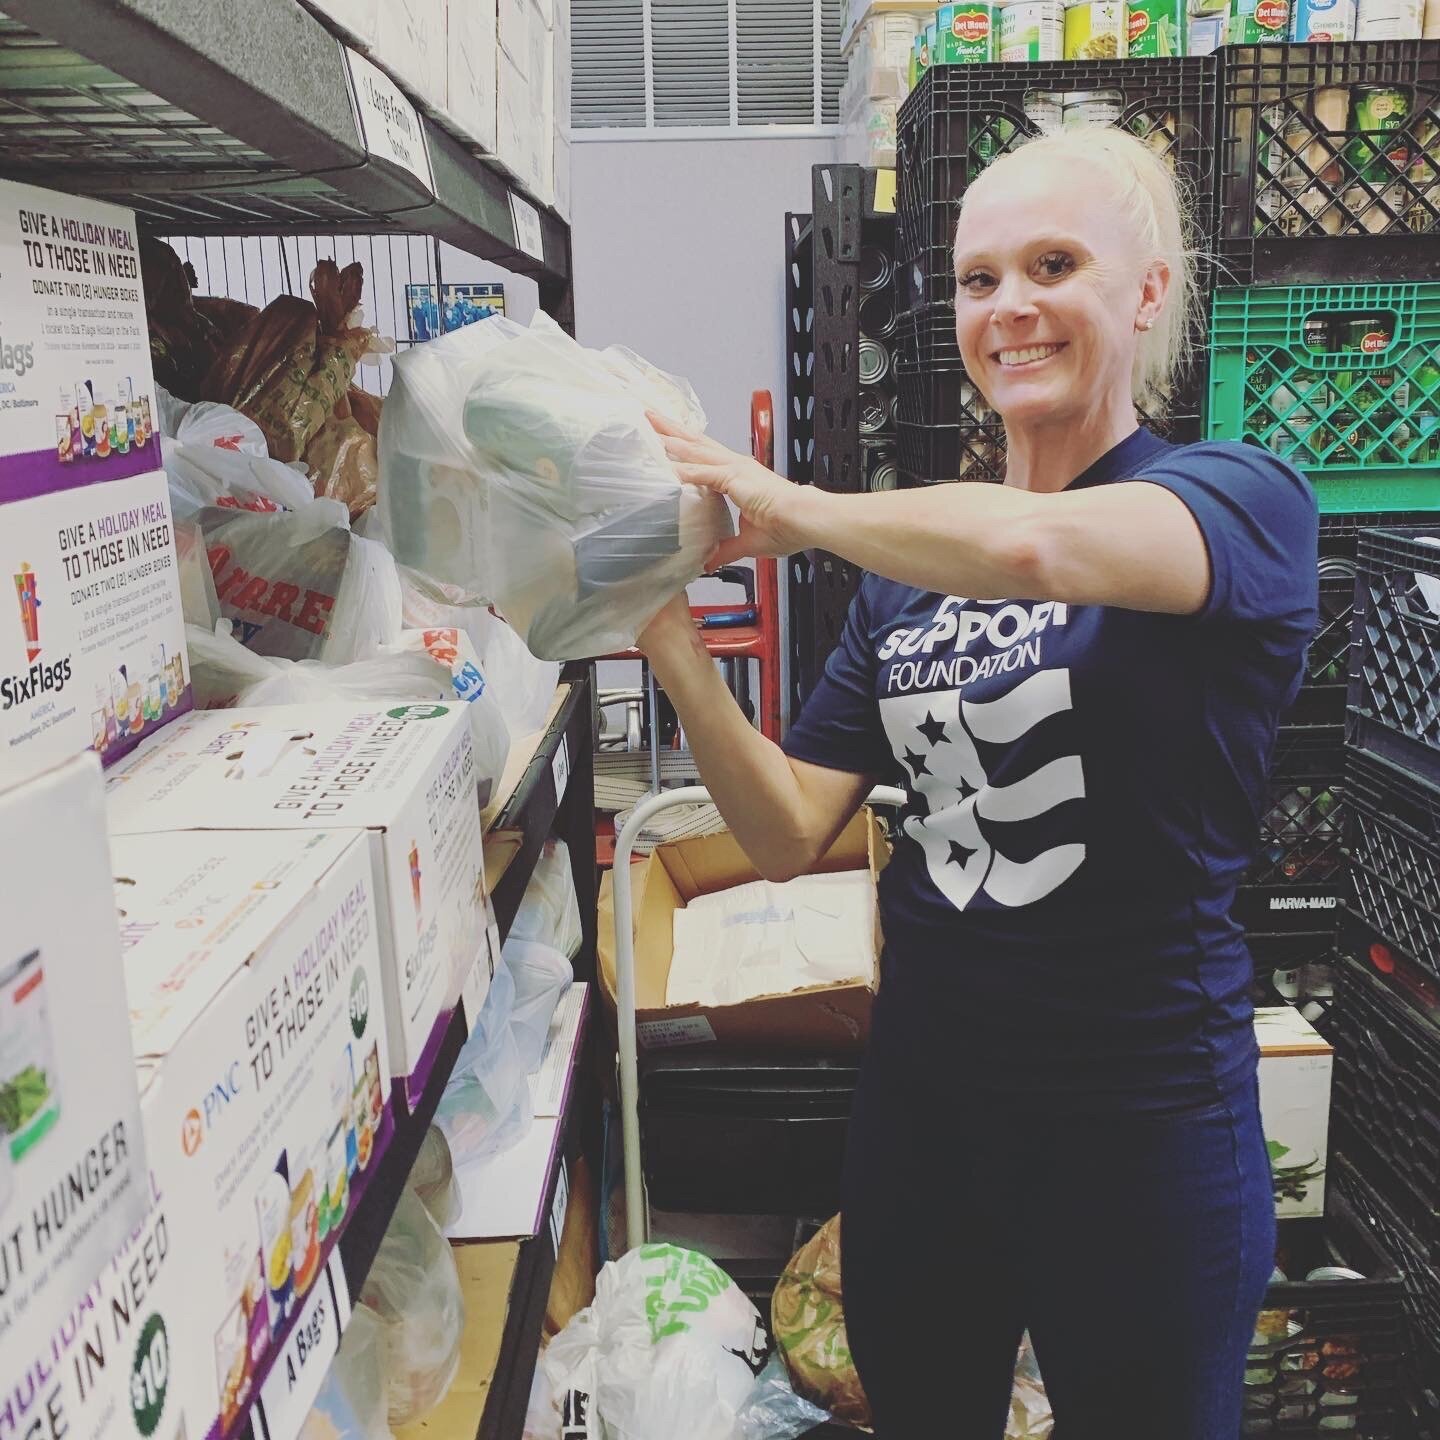 A volunteer helping to put items on shelves